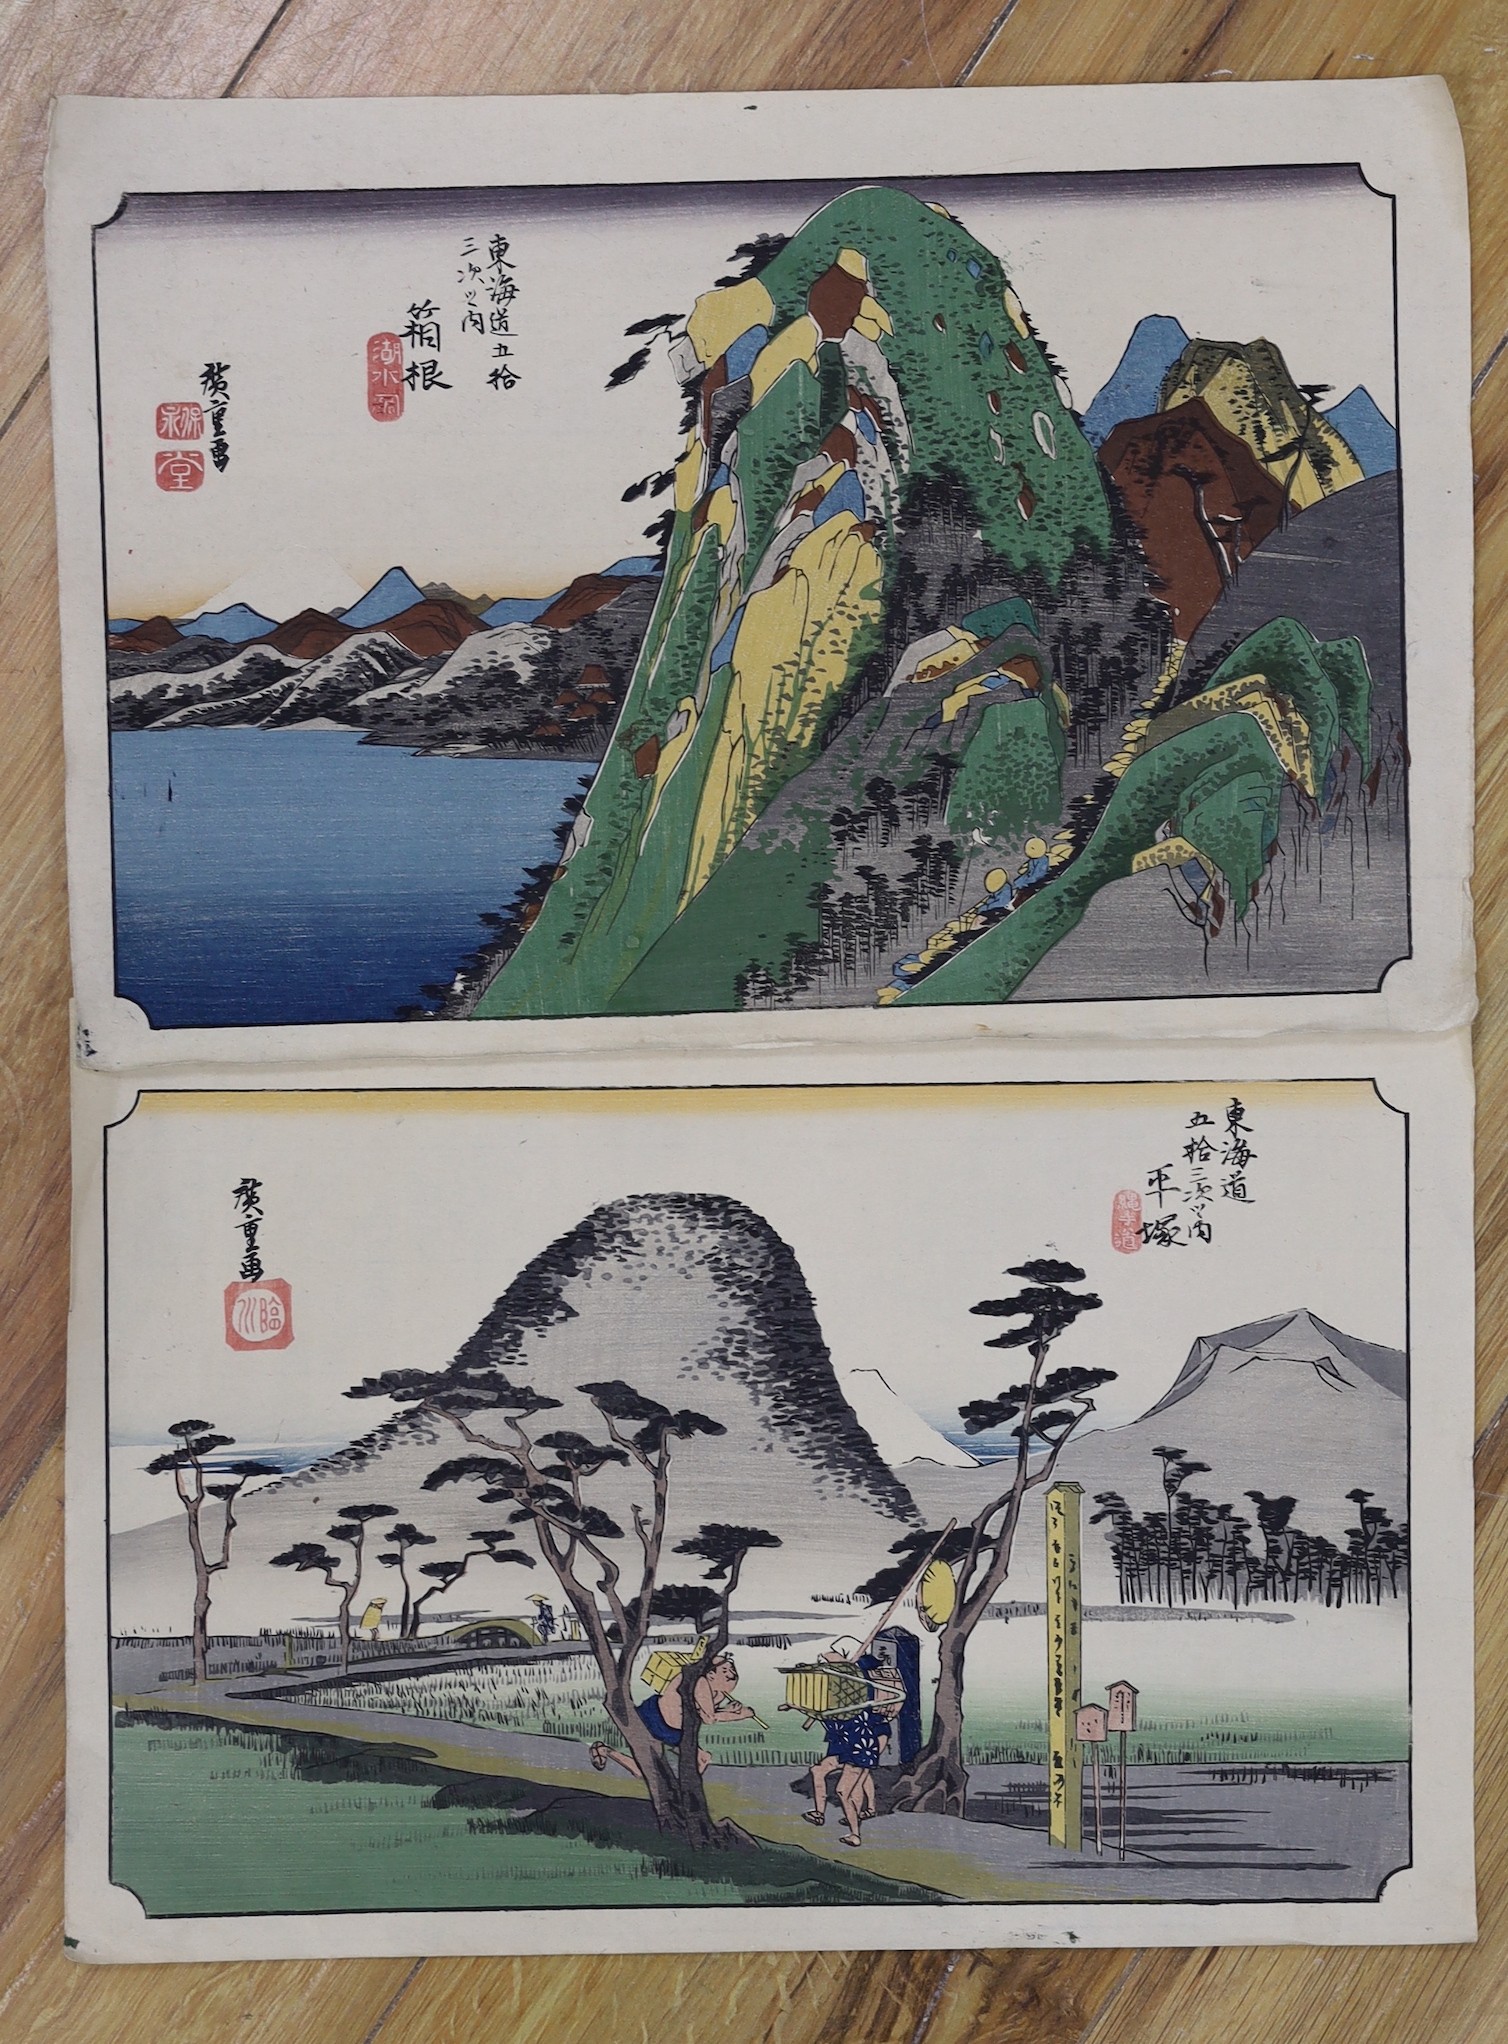 Hiroshige (1797-1858), two woodblock prints, Stations of The Tokaido, 25 x 38cm, unframed                                                                                                                                   